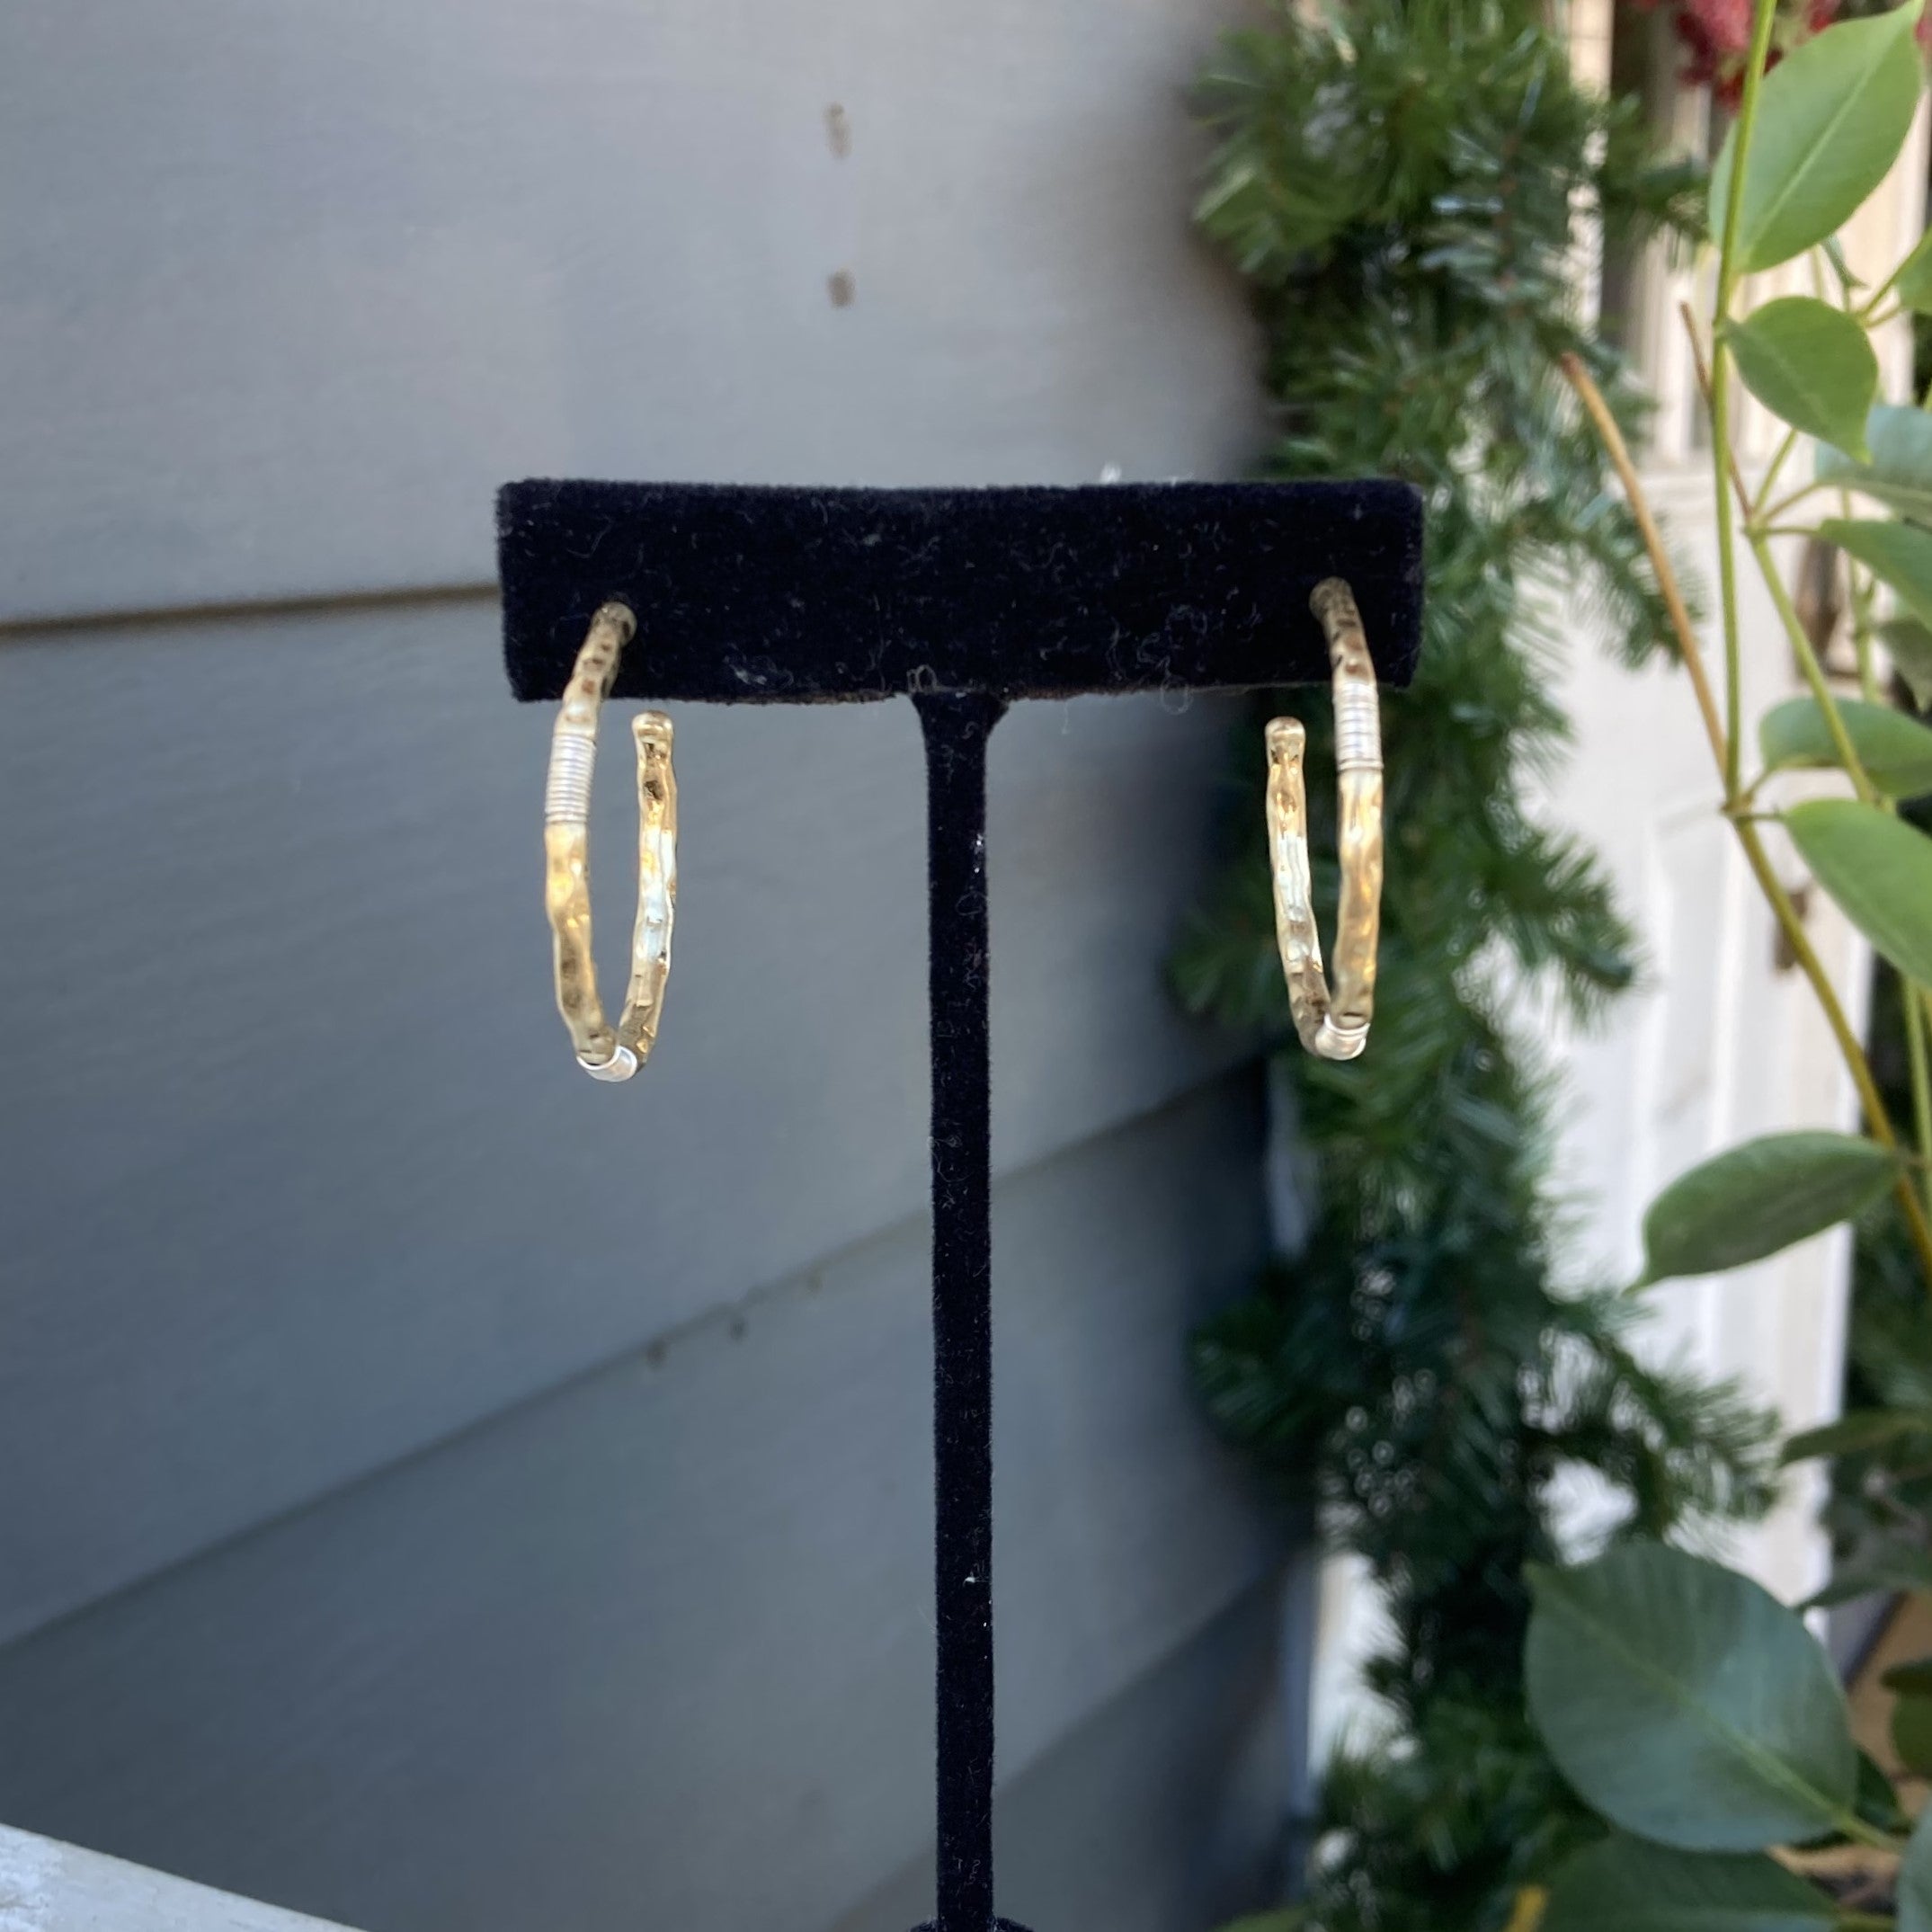 These unique Hammered Gold Hoop Earrings make a statement! Timeless and elegant, these classic gold hoops will become a staple in your collection. With its chic hammered finish, these earrings will be sure to add a bit of sparkle to any look.